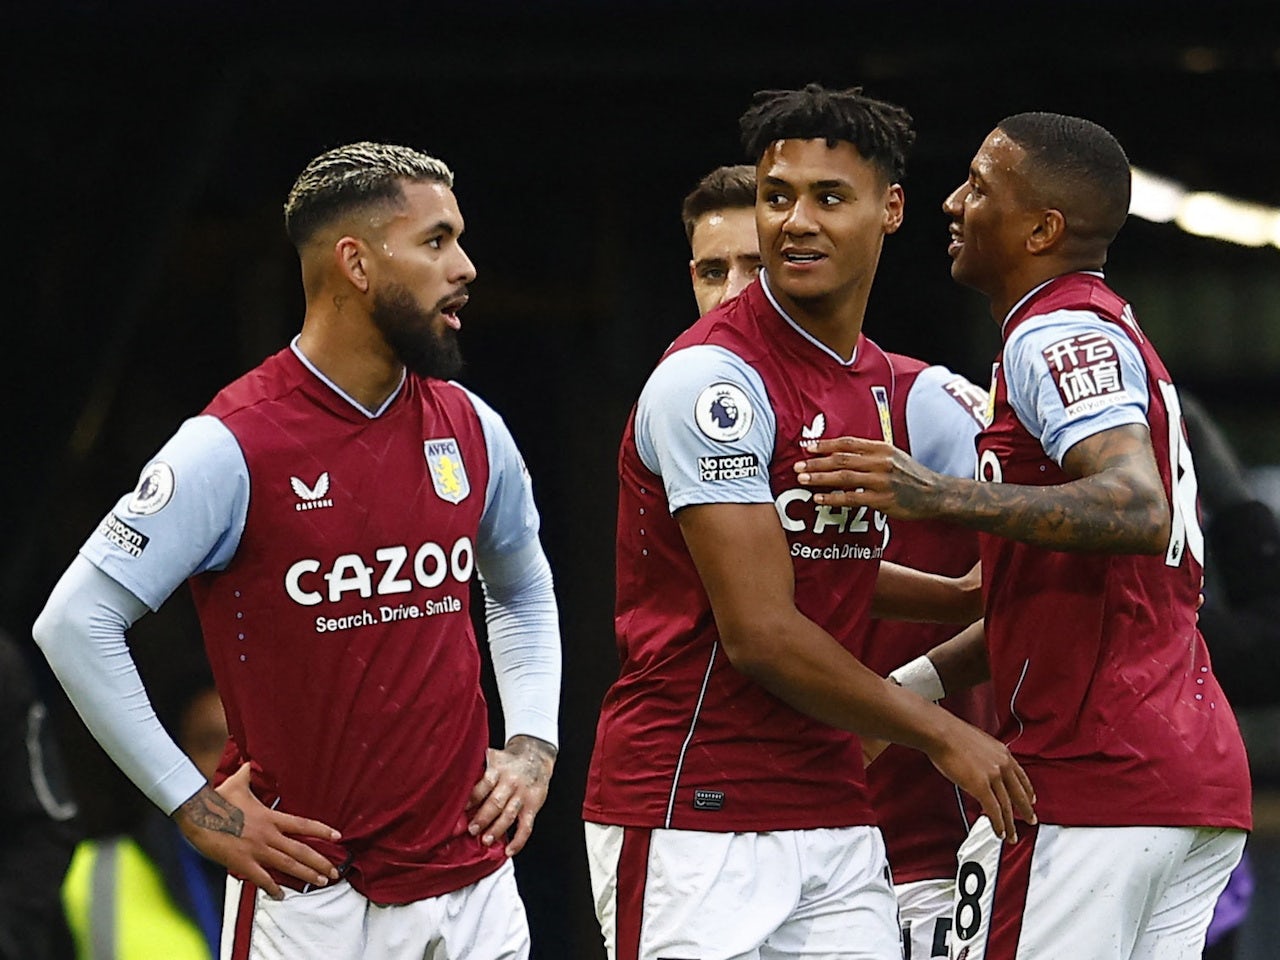 Aston Villa climb above Chelsea in table with two-goal win at Stamford Bridge